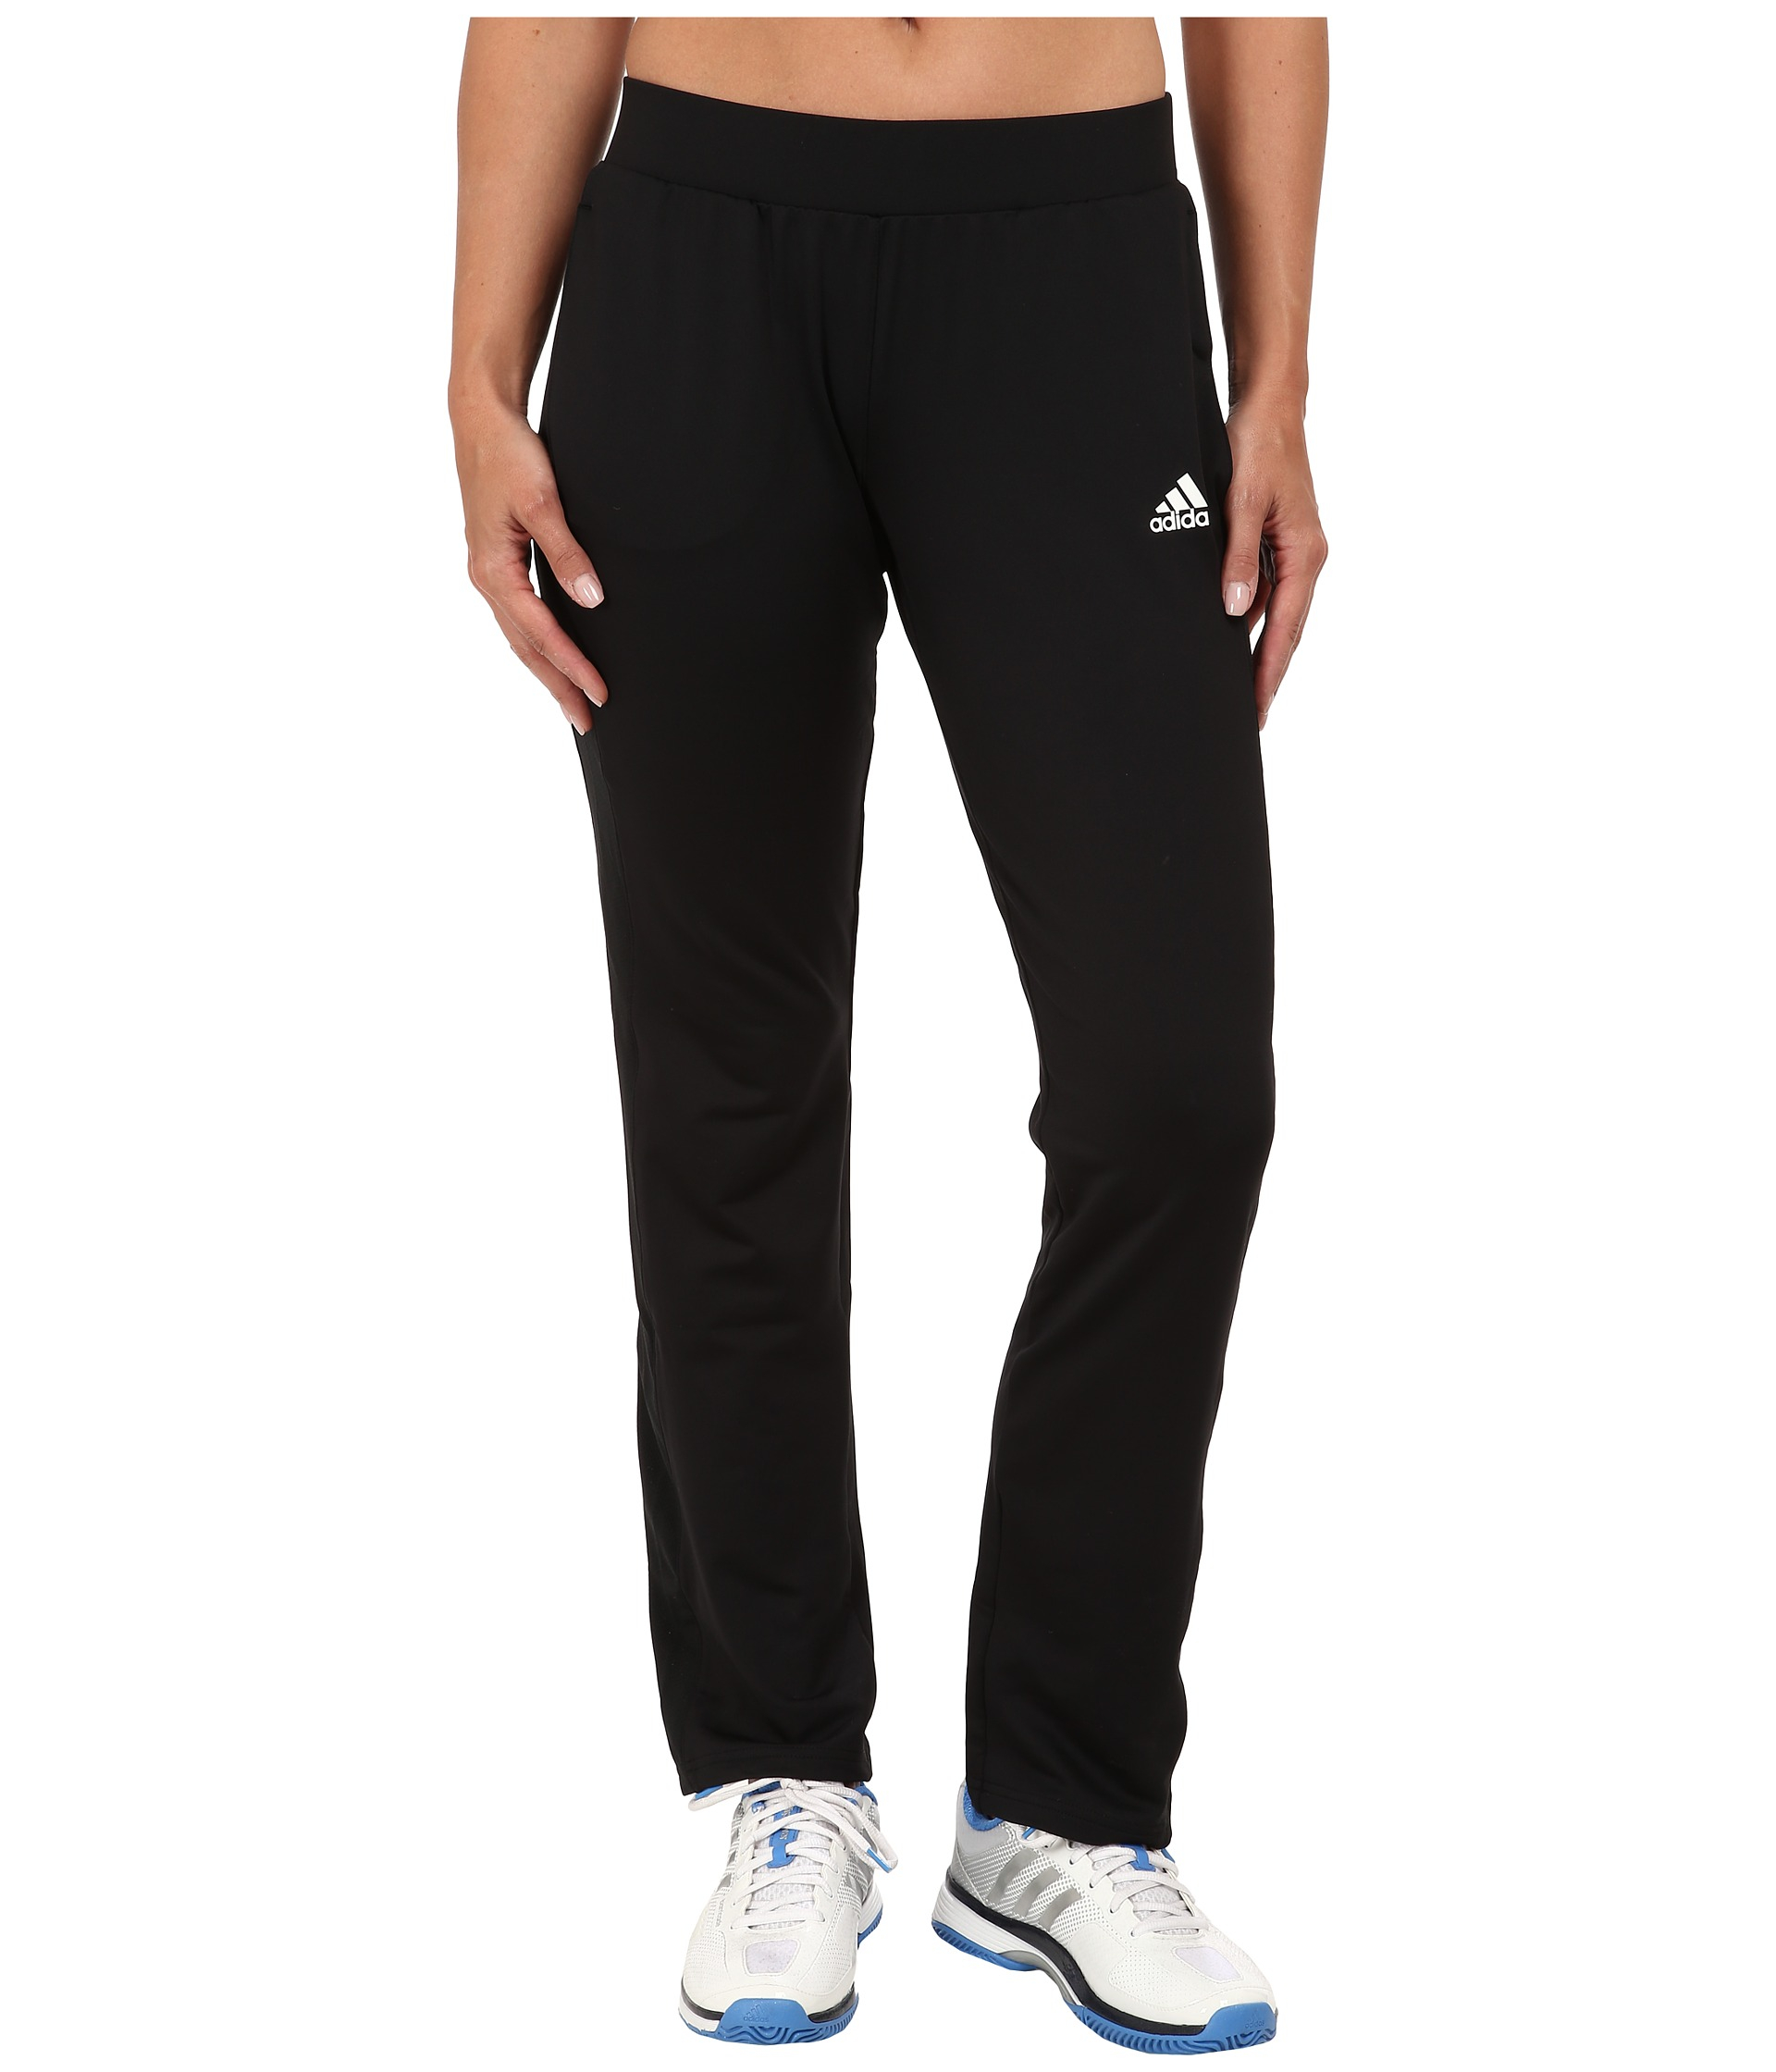 Adidas Tennis Sequencials Warmup Pant in Black (Black/White) | Lyst